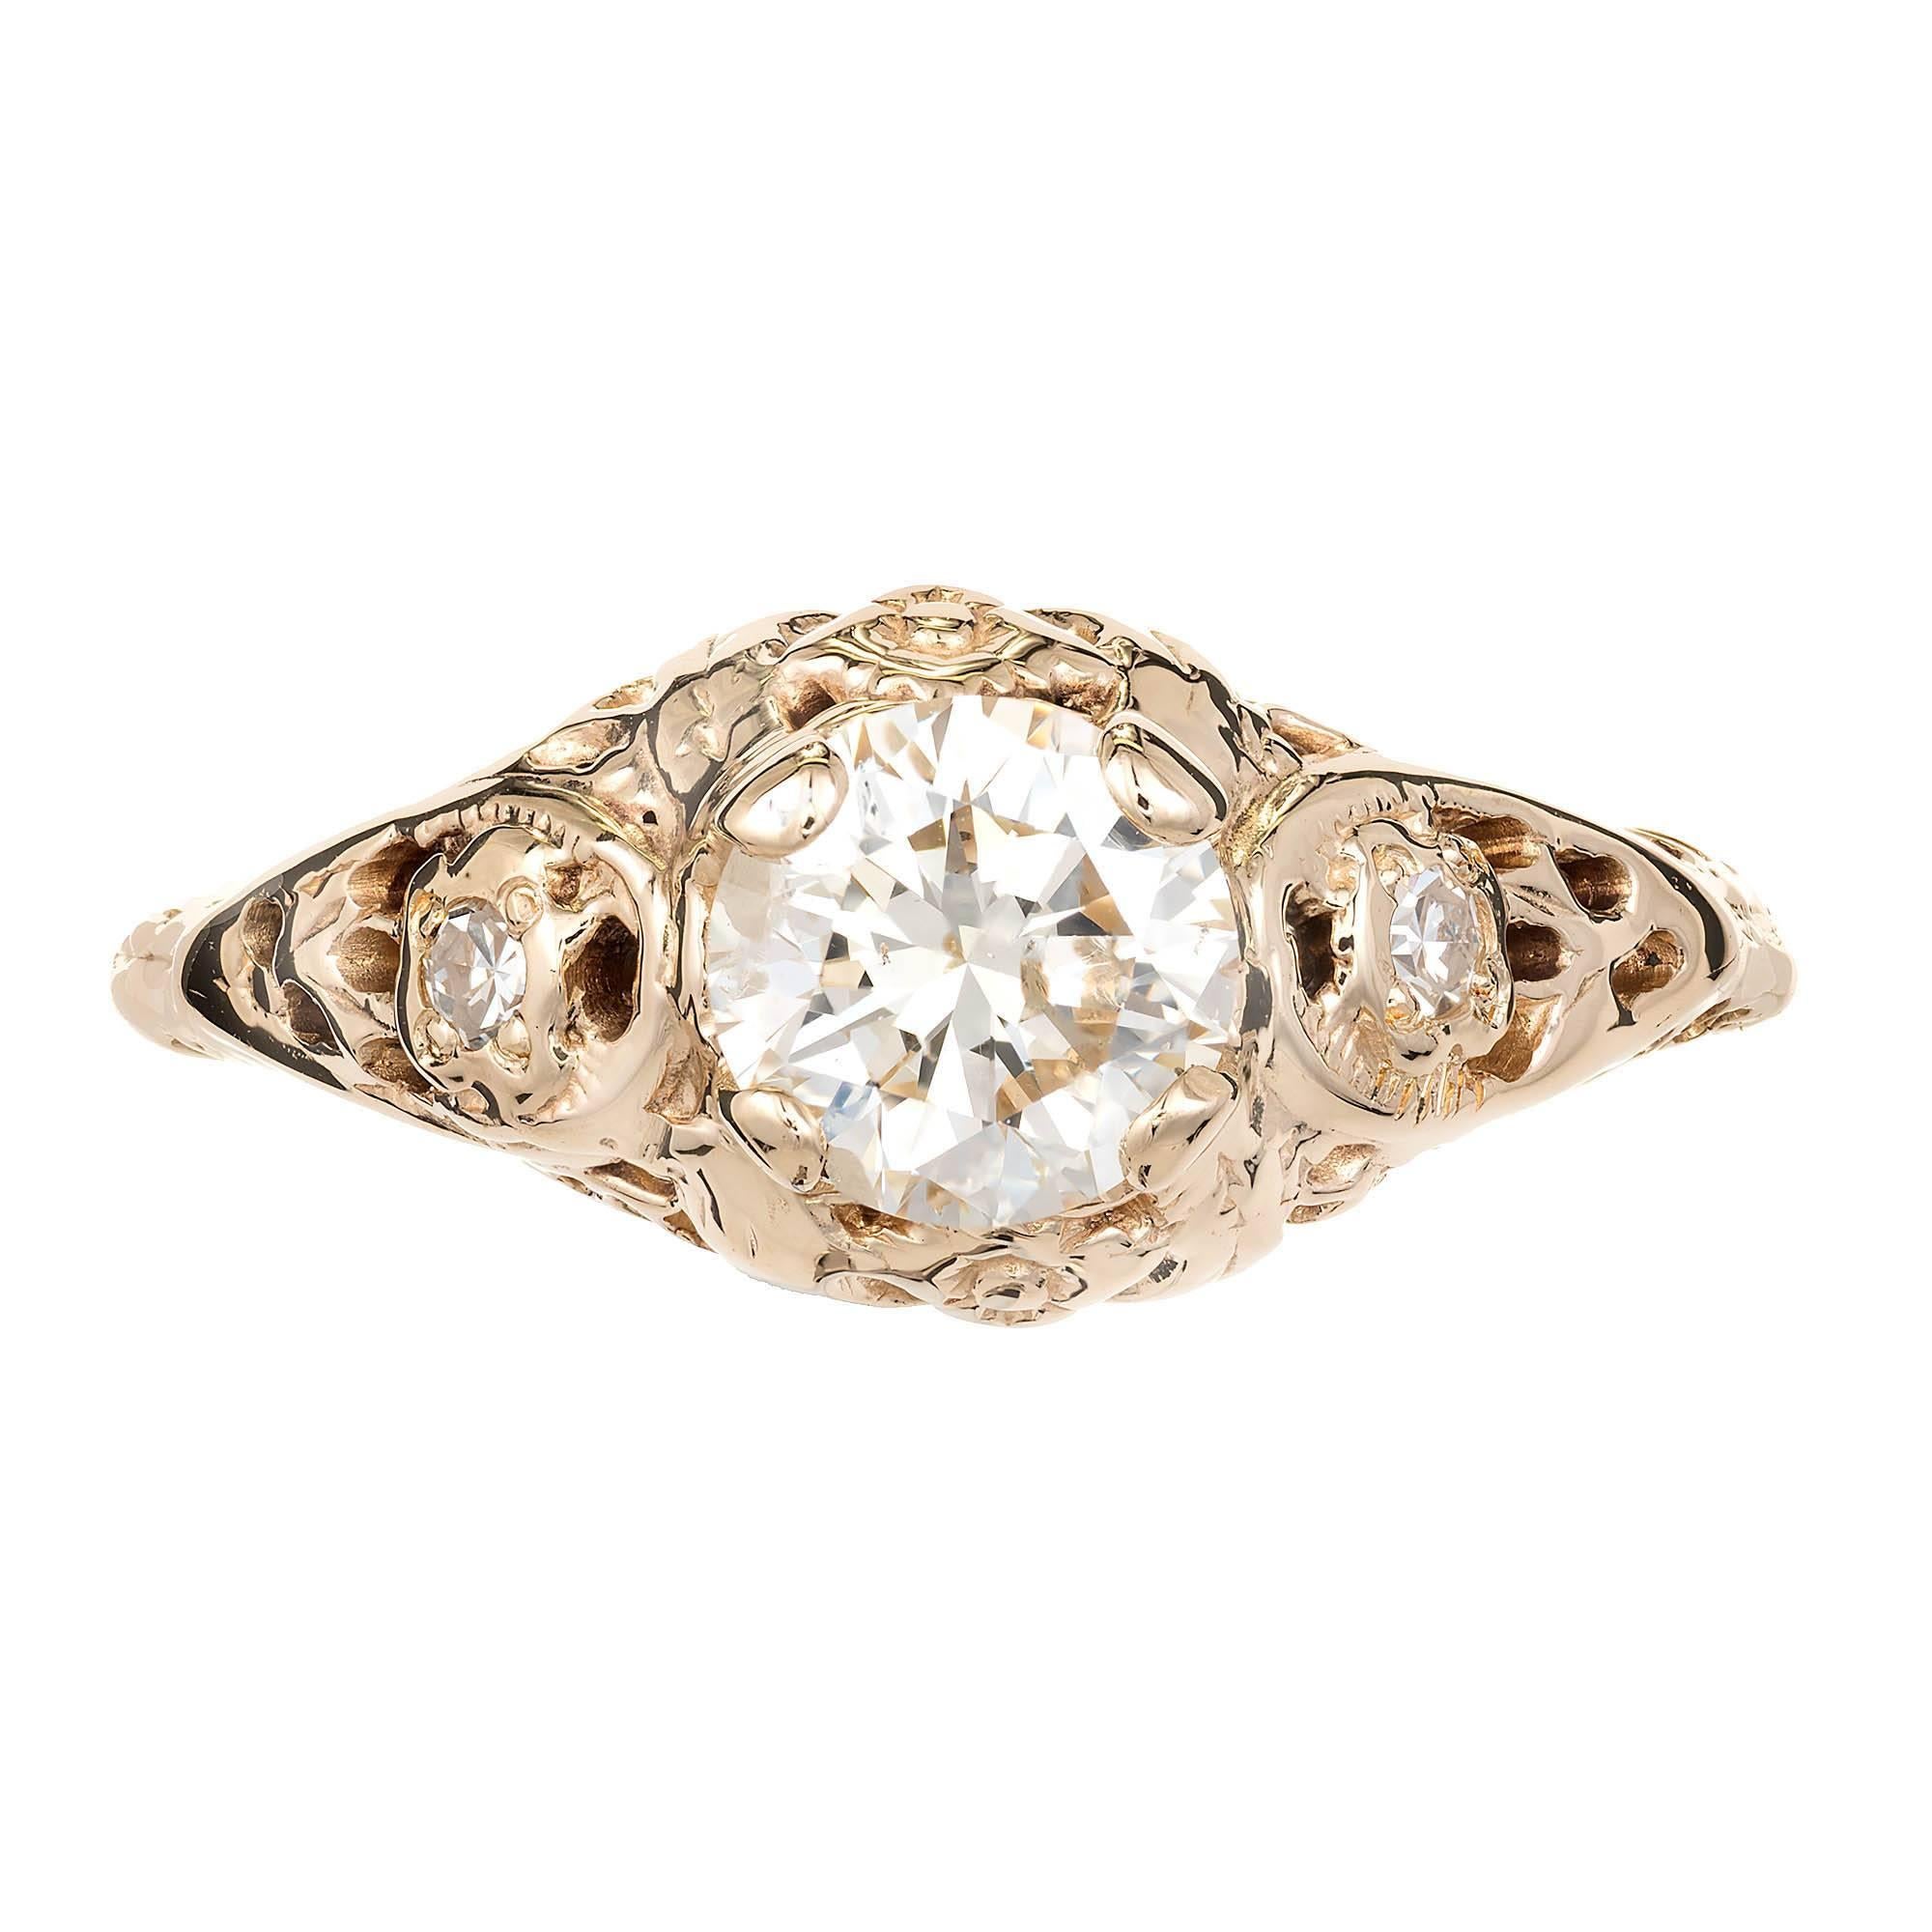 Vintage 1930s Art Deco  14k yellow gold filigree diamond engagement ring. Original transitional cut diamond bright and sparkly. 

1 transitional cut diamond, approx. total weight .77cts, J – K, SI3, 
Size 4.5 and sizable
14k yellow gold
Tested and